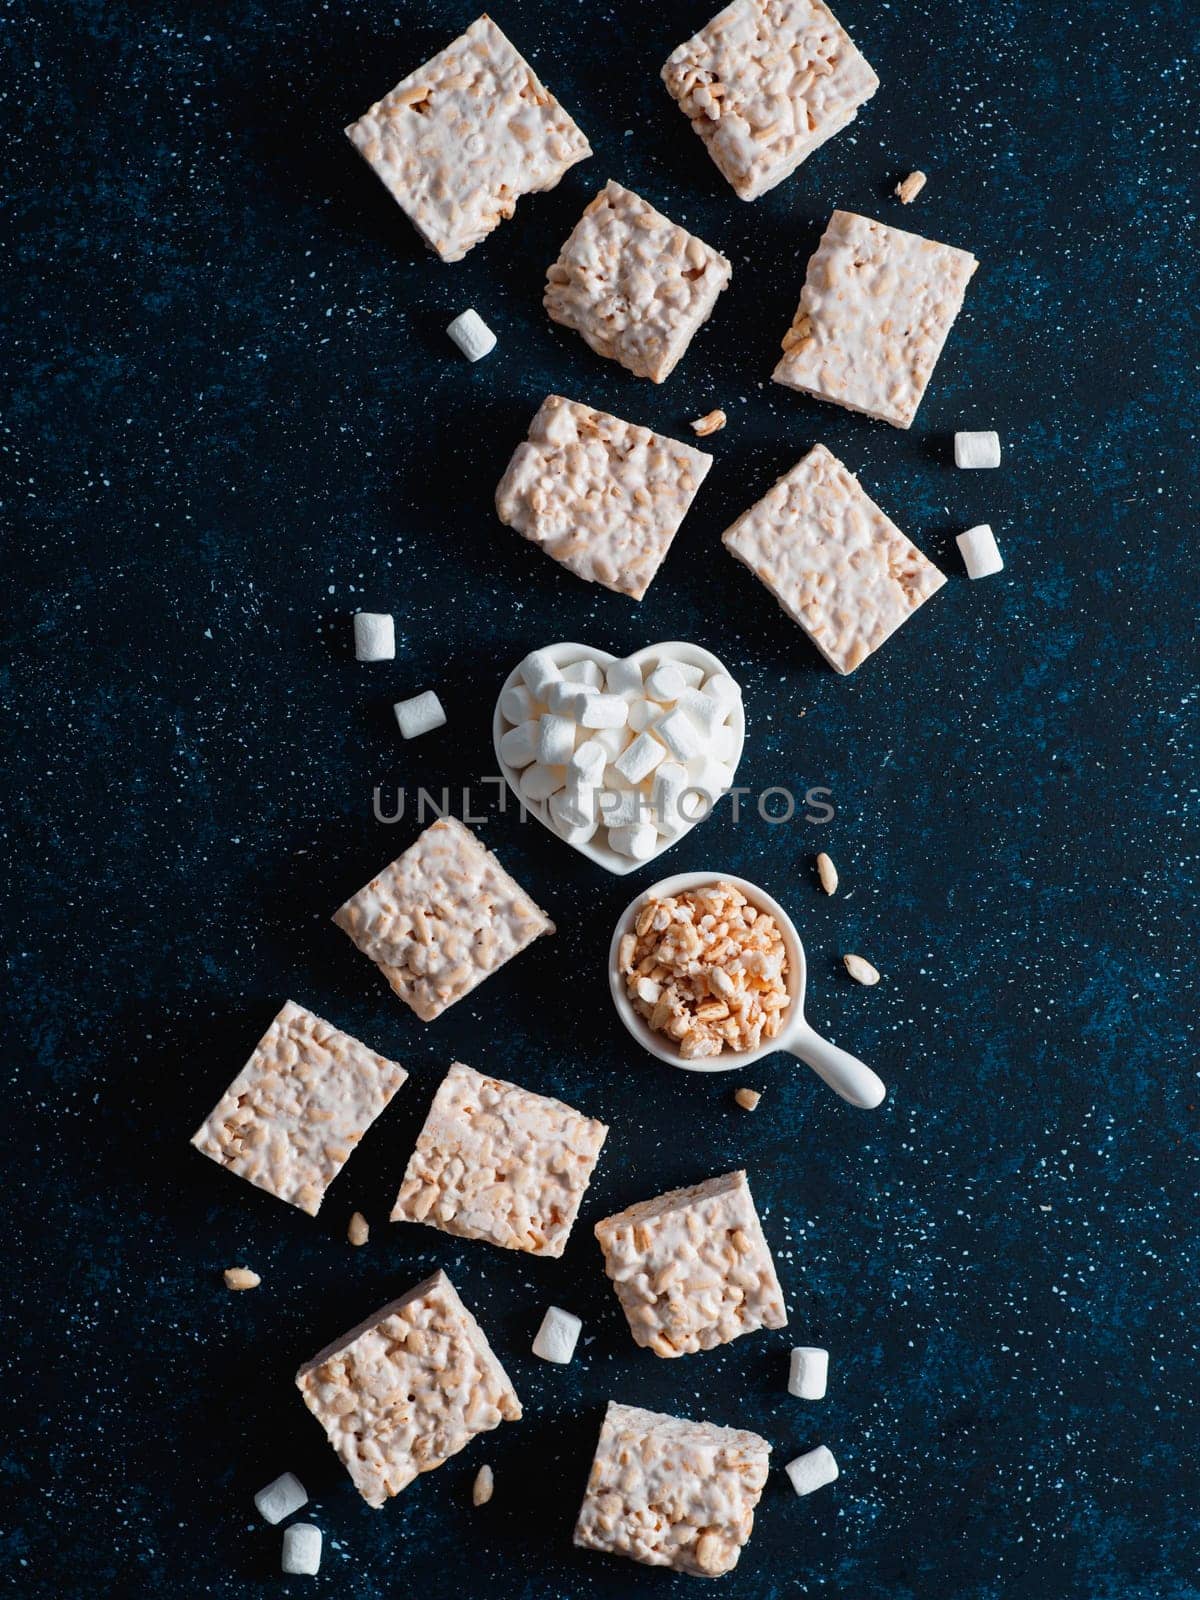 Homemade square bars of Marshmallow and crispy rice and ingredients on dark blue background. American dessert with marshmallow and crispy rice. Top view. Copy space